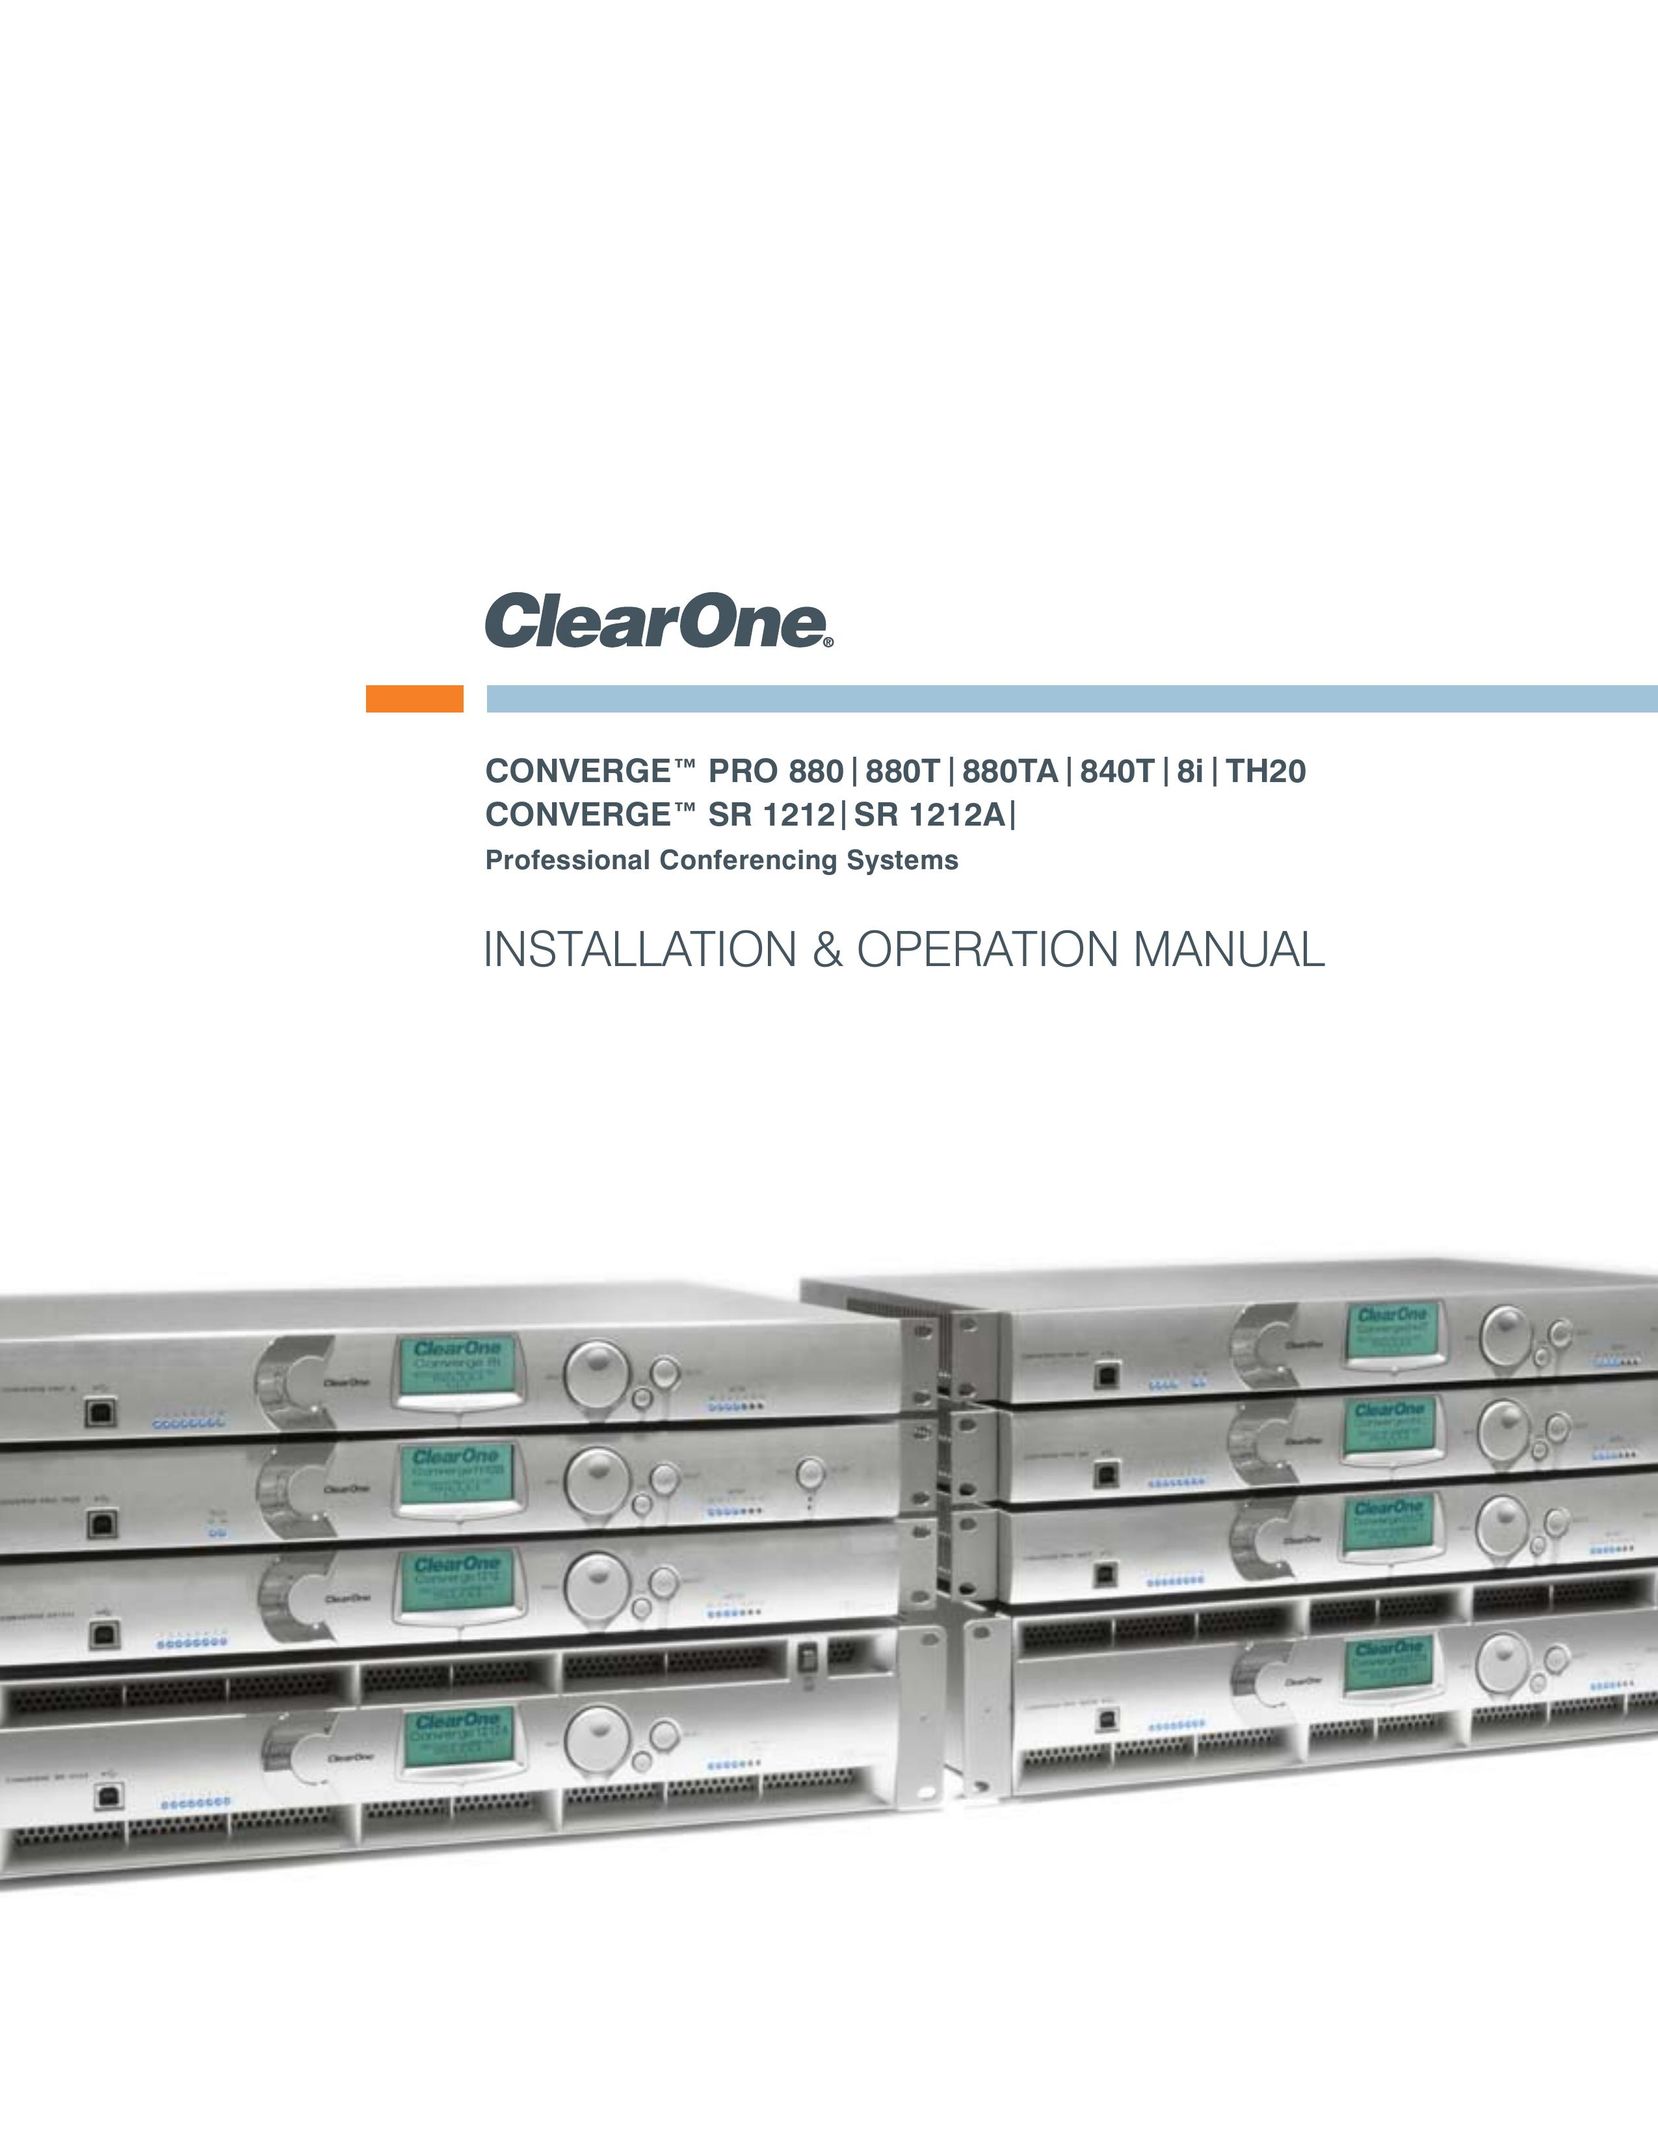 ClearOne comm SR 1212 Conference Phone User Manual